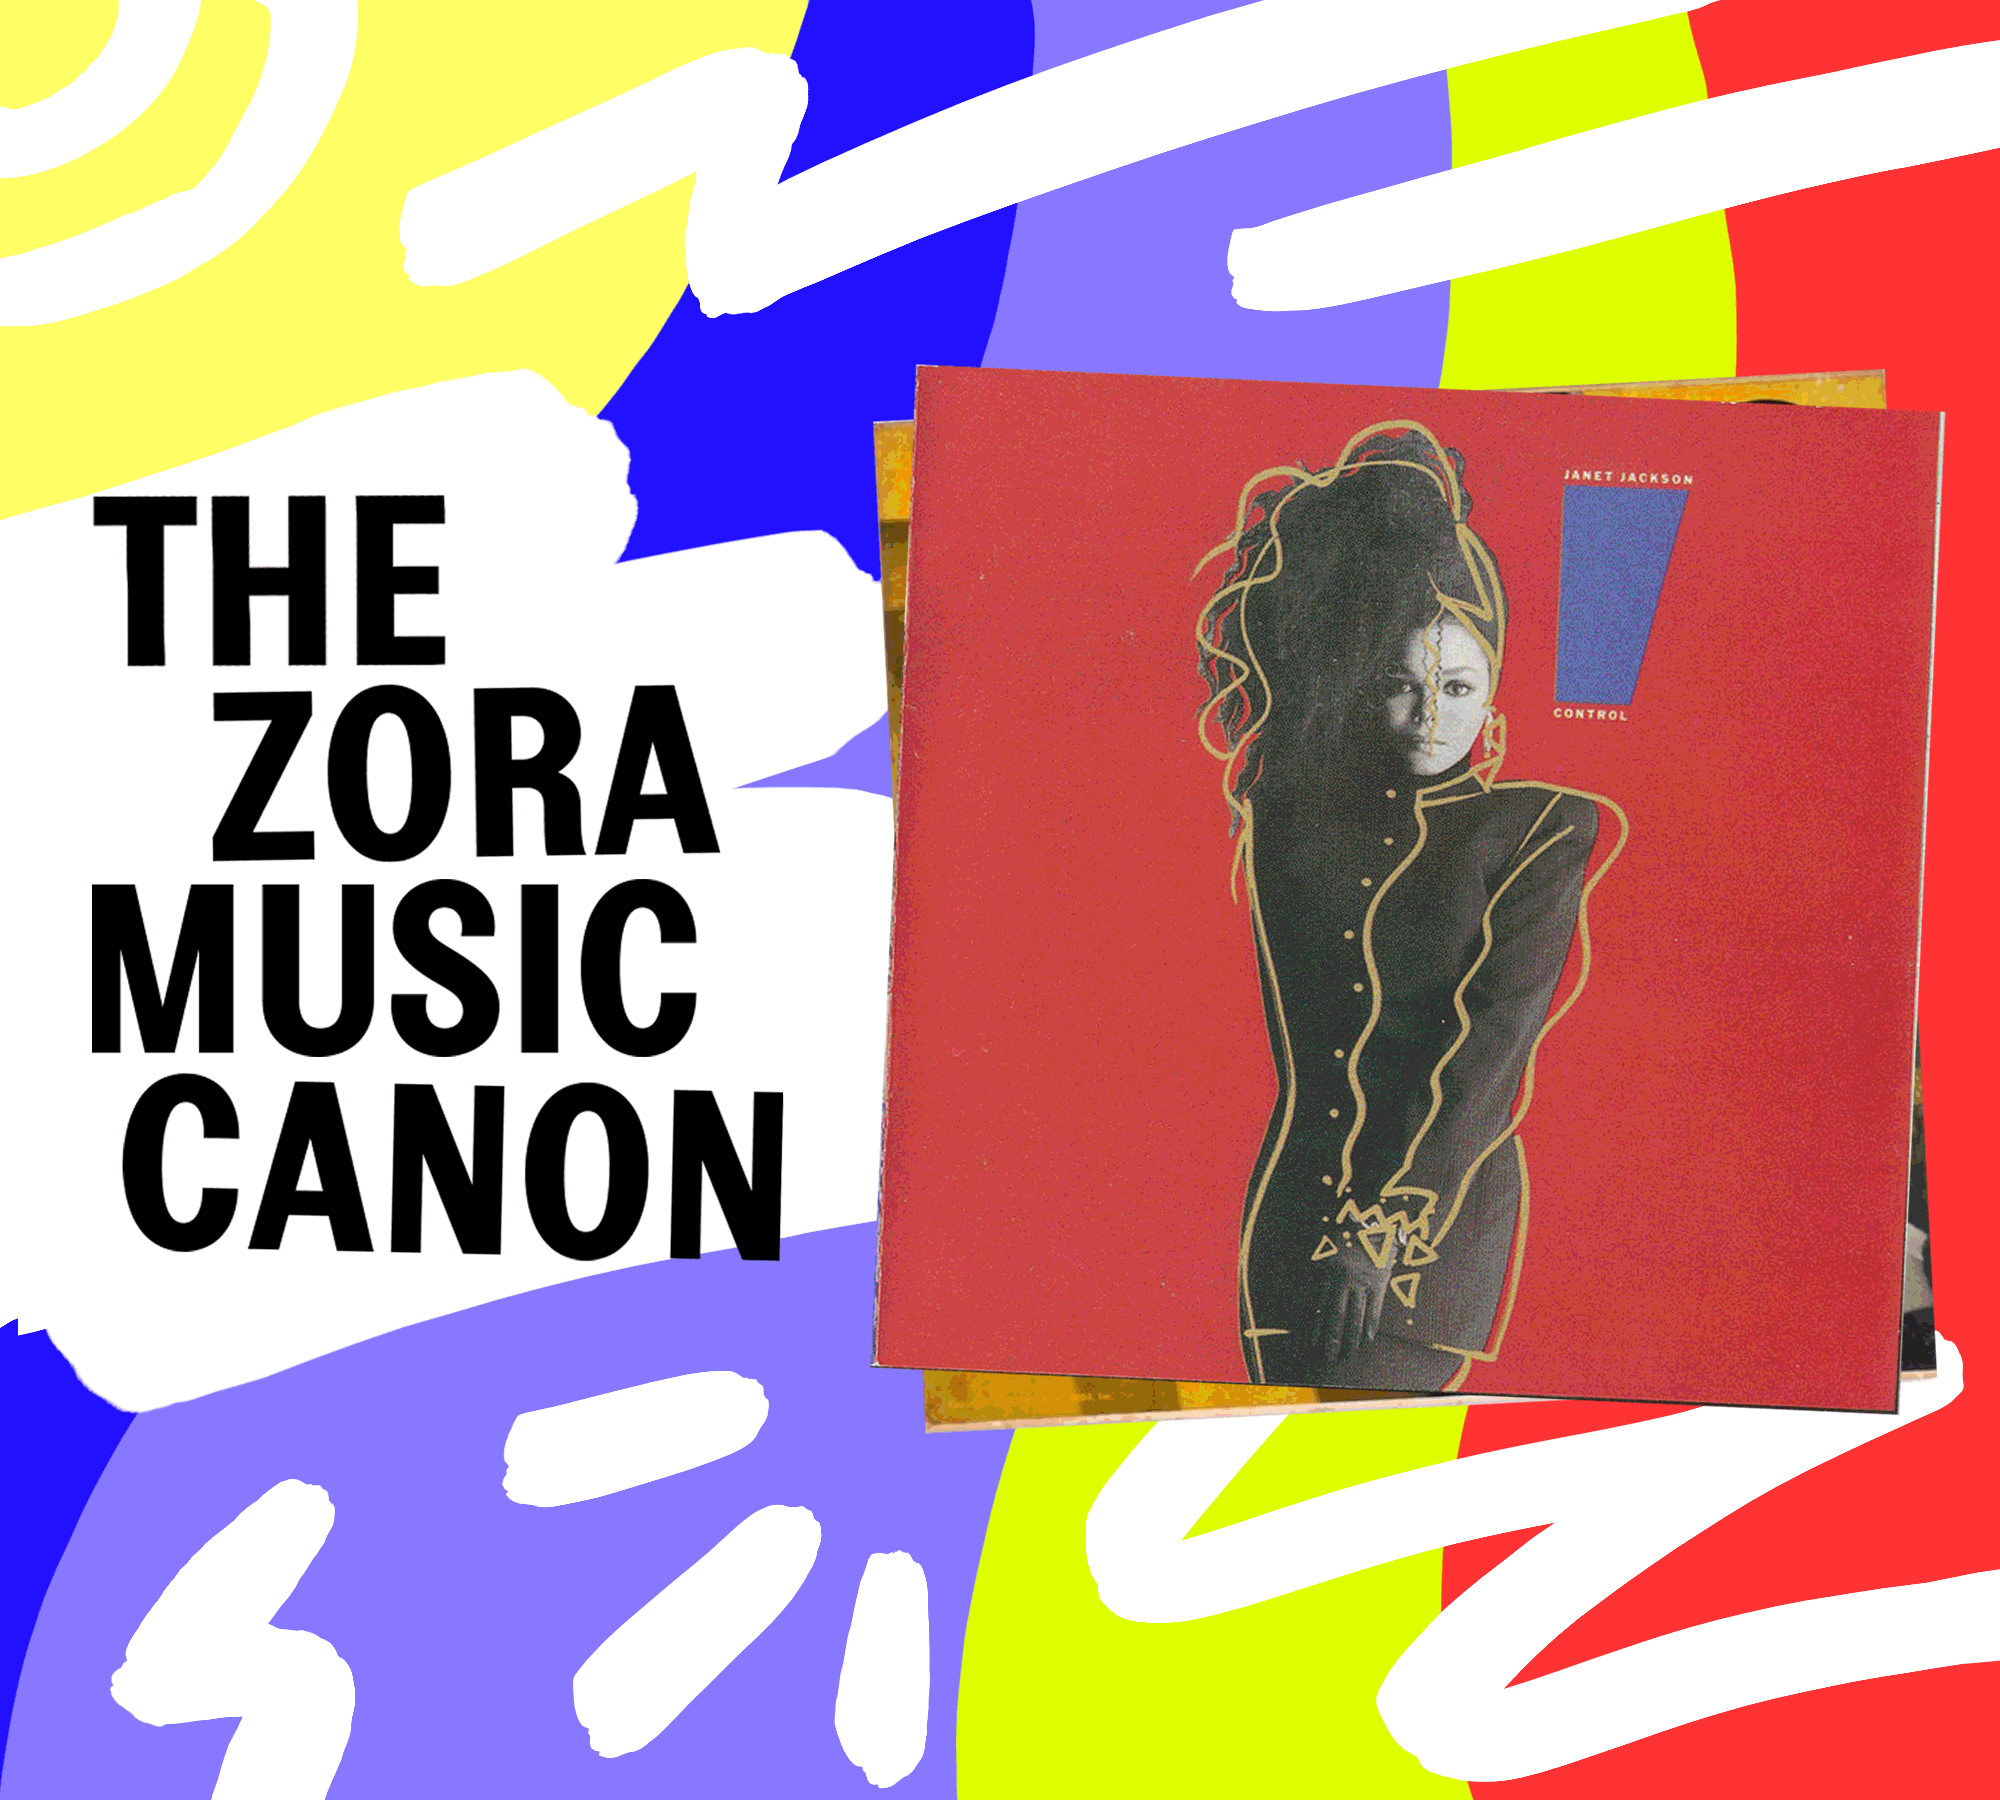 A lively image that says ?The ZORA Music Canon? with several acclaimed album covers by Black women animated  as a gif.